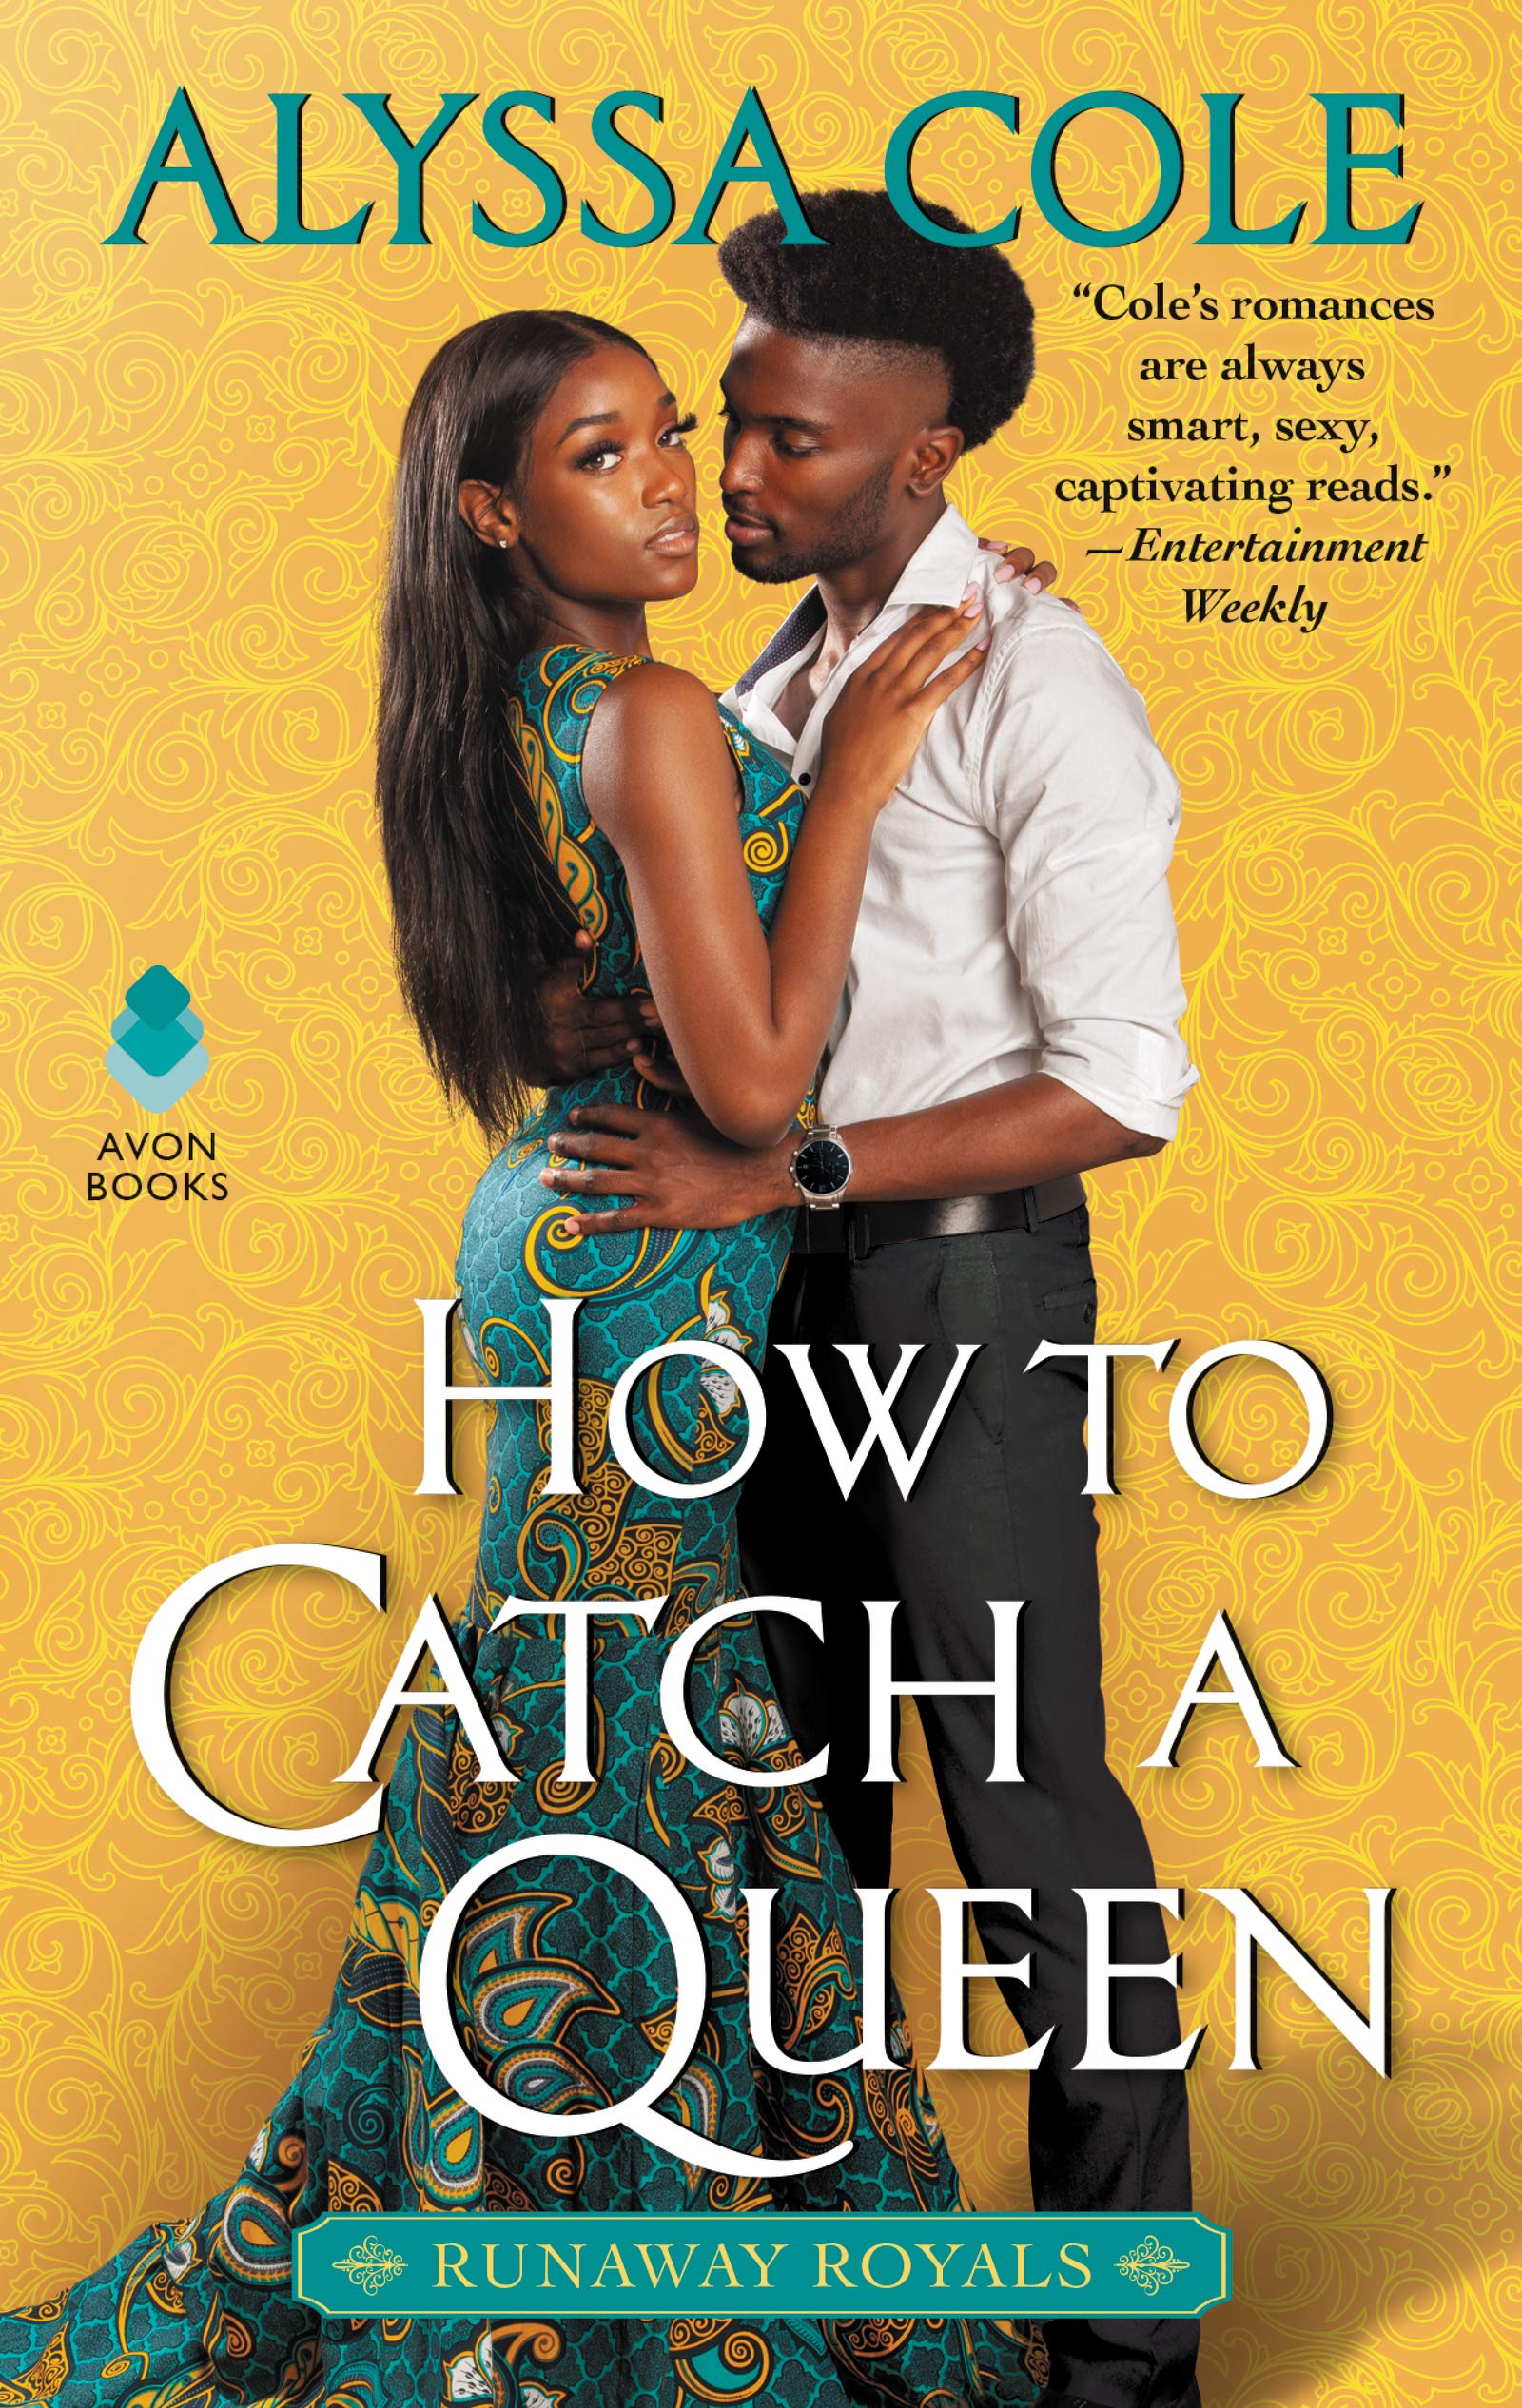 Image for "How to Catch a Queen"